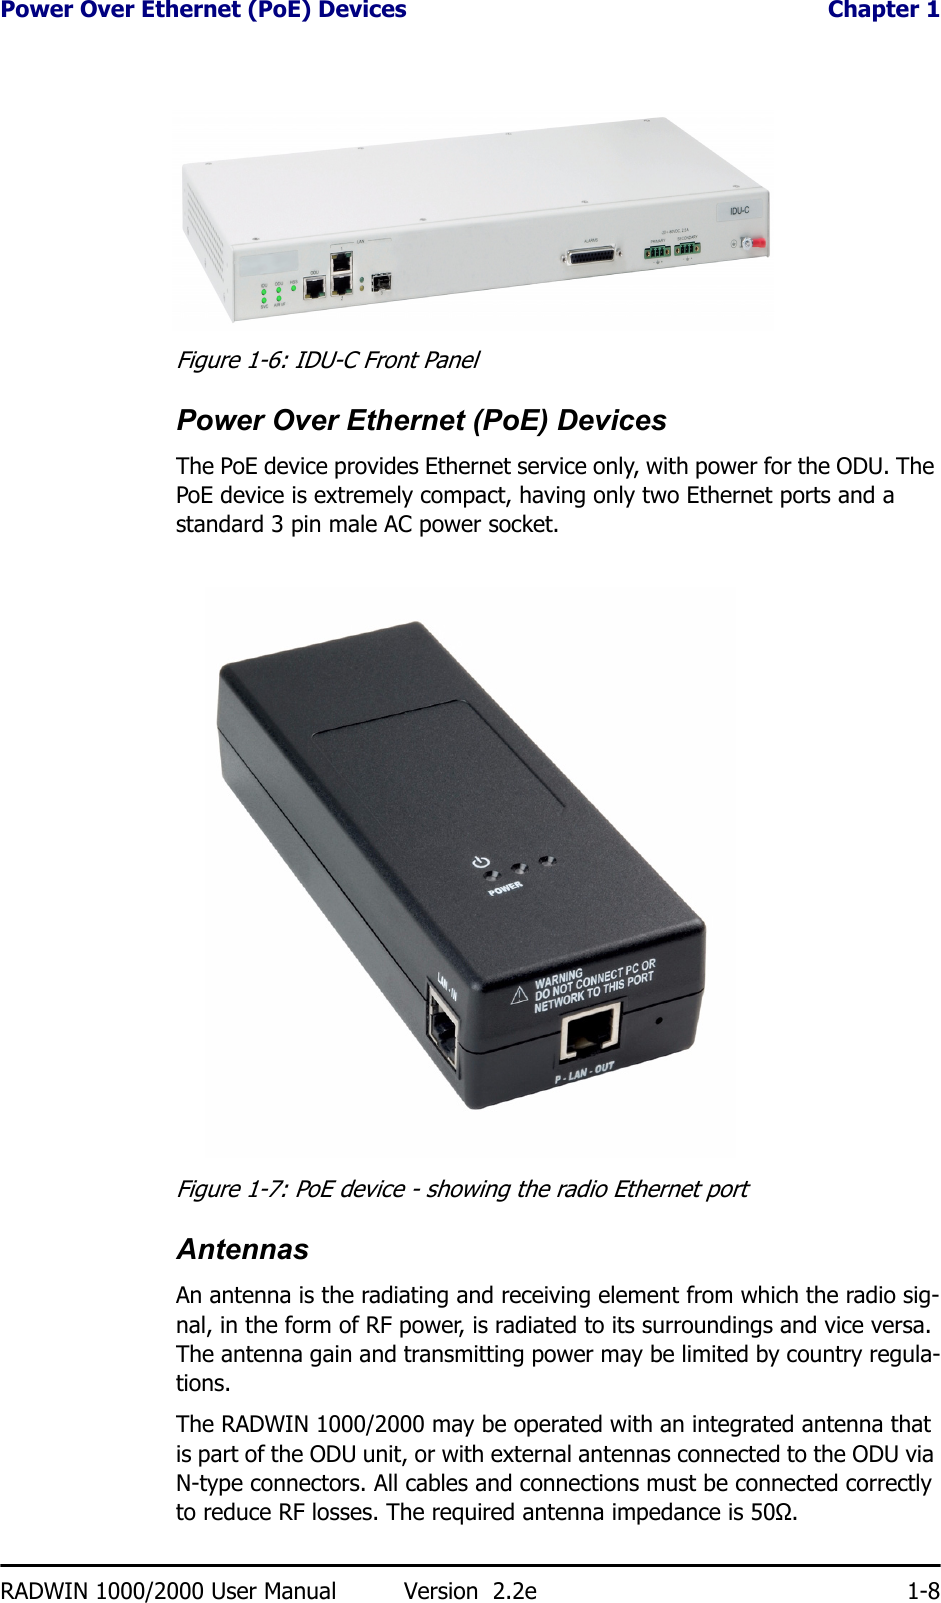 Power Over Ethernet (PoE) Devices  Chapter 1RADWIN 1000/2000 User Manual Version  2.2e 1-8Figure 1-6: IDU-C Front PanelPower Over Ethernet (PoE) DevicesThe PoE device provides Ethernet service only, with power for the ODU. The PoE device is extremely compact, having only two Ethernet ports and a standard 3 pin male AC power socket.Figure 1-7: PoE device - showing the radio Ethernet portAntennasAn antenna is the radiating and receiving element from which the radio sig-nal, in the form of RF power, is radiated to its surroundings and vice versa. The antenna gain and transmitting power may be limited by country regula-tions.The RADWIN 1000/2000 may be operated with an integrated antenna that is part of the ODU unit, or with external antennas connected to the ODU via N-type connectors. All cables and connections must be connected correctly to reduce RF losses. The required antenna impedance is 50Ω.